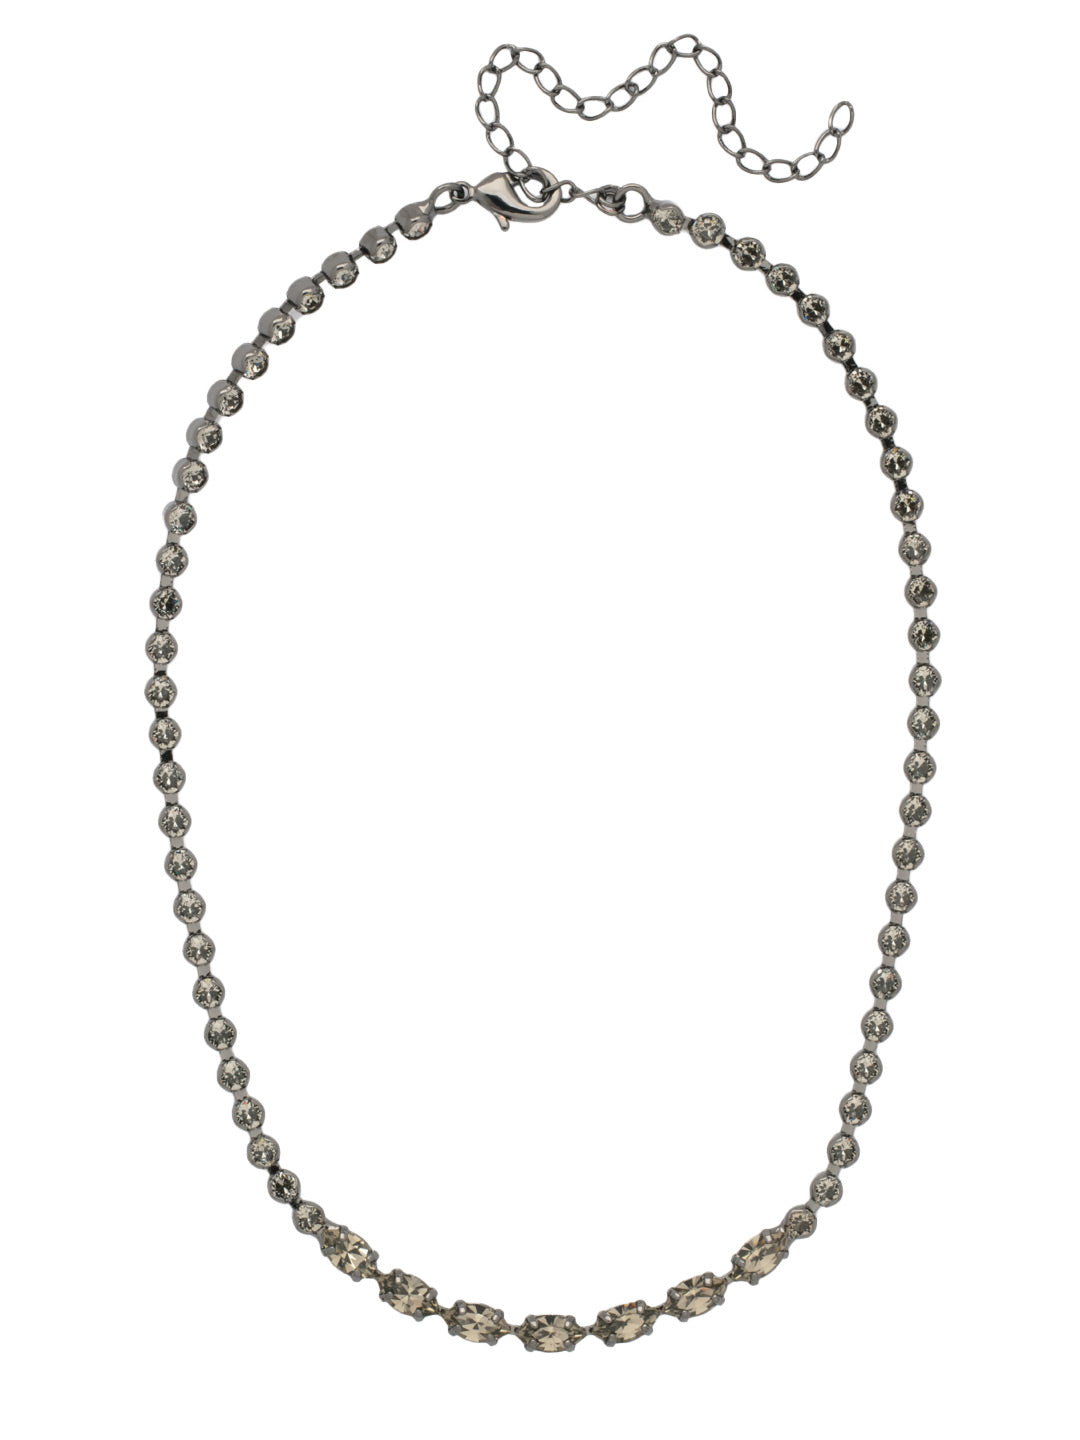 Clarissa Rhinestone Chain Tennis Necklace - NFL6GMBD - <p>The Clarissa Rhinestone Chain Tennis Necklace features a line of navette cut crystals on an adjustable rhinestone chain, secured with a lobster claw clasp. From Sorrelli's Black Diamond collection in our Gun Metal finish.</p>